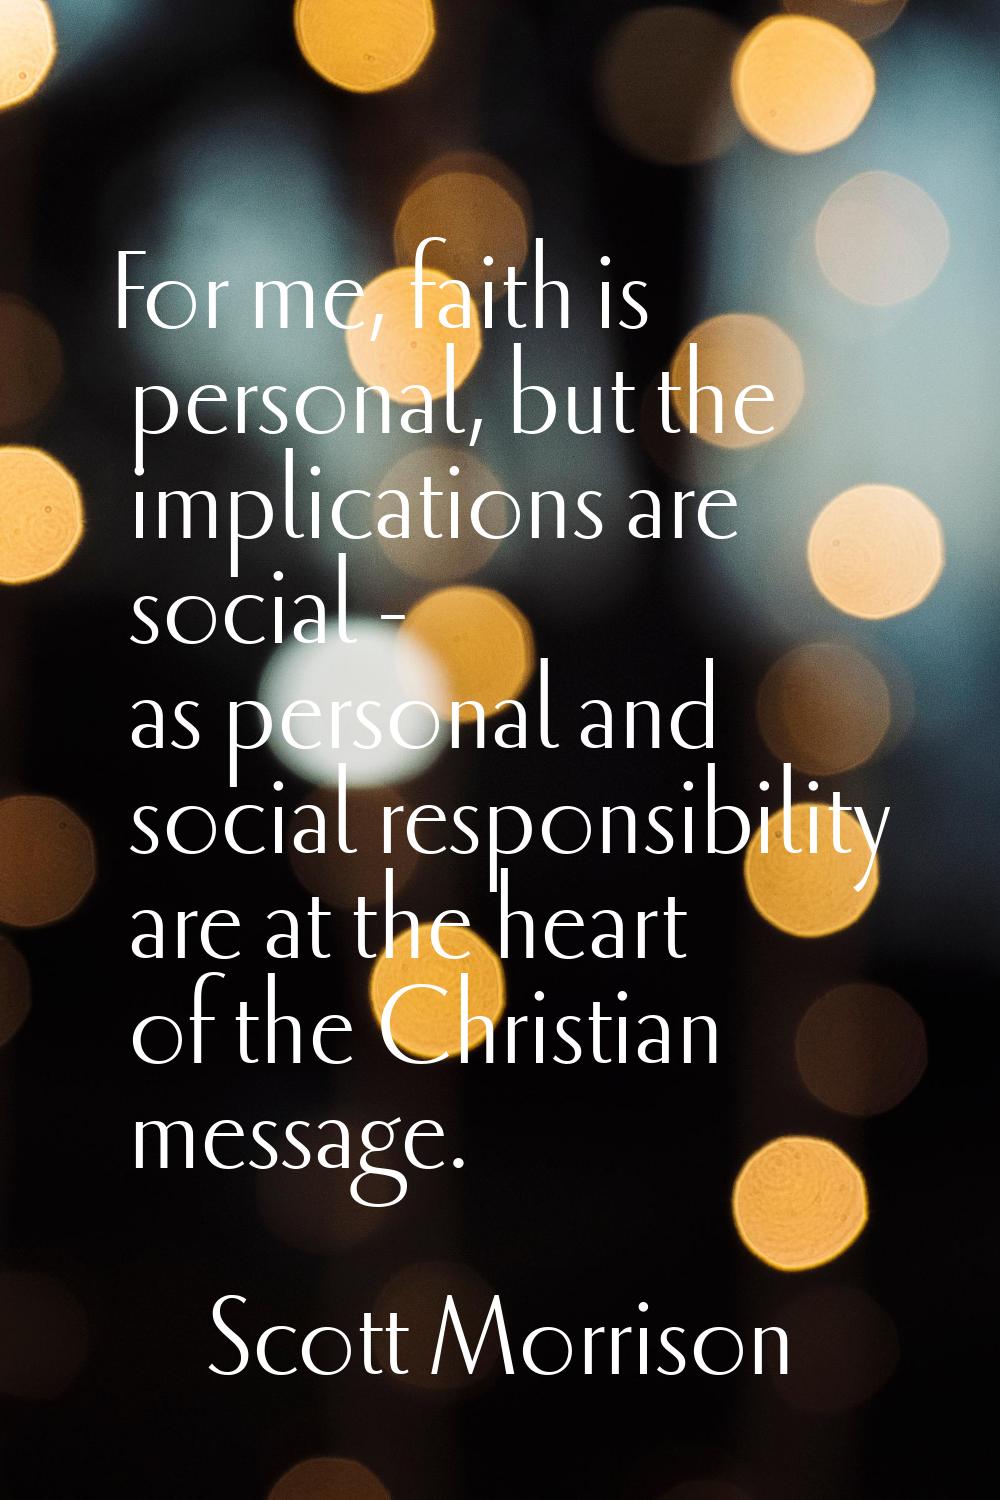 For me, faith is personal, but the implications are social - as personal and social responsibility 